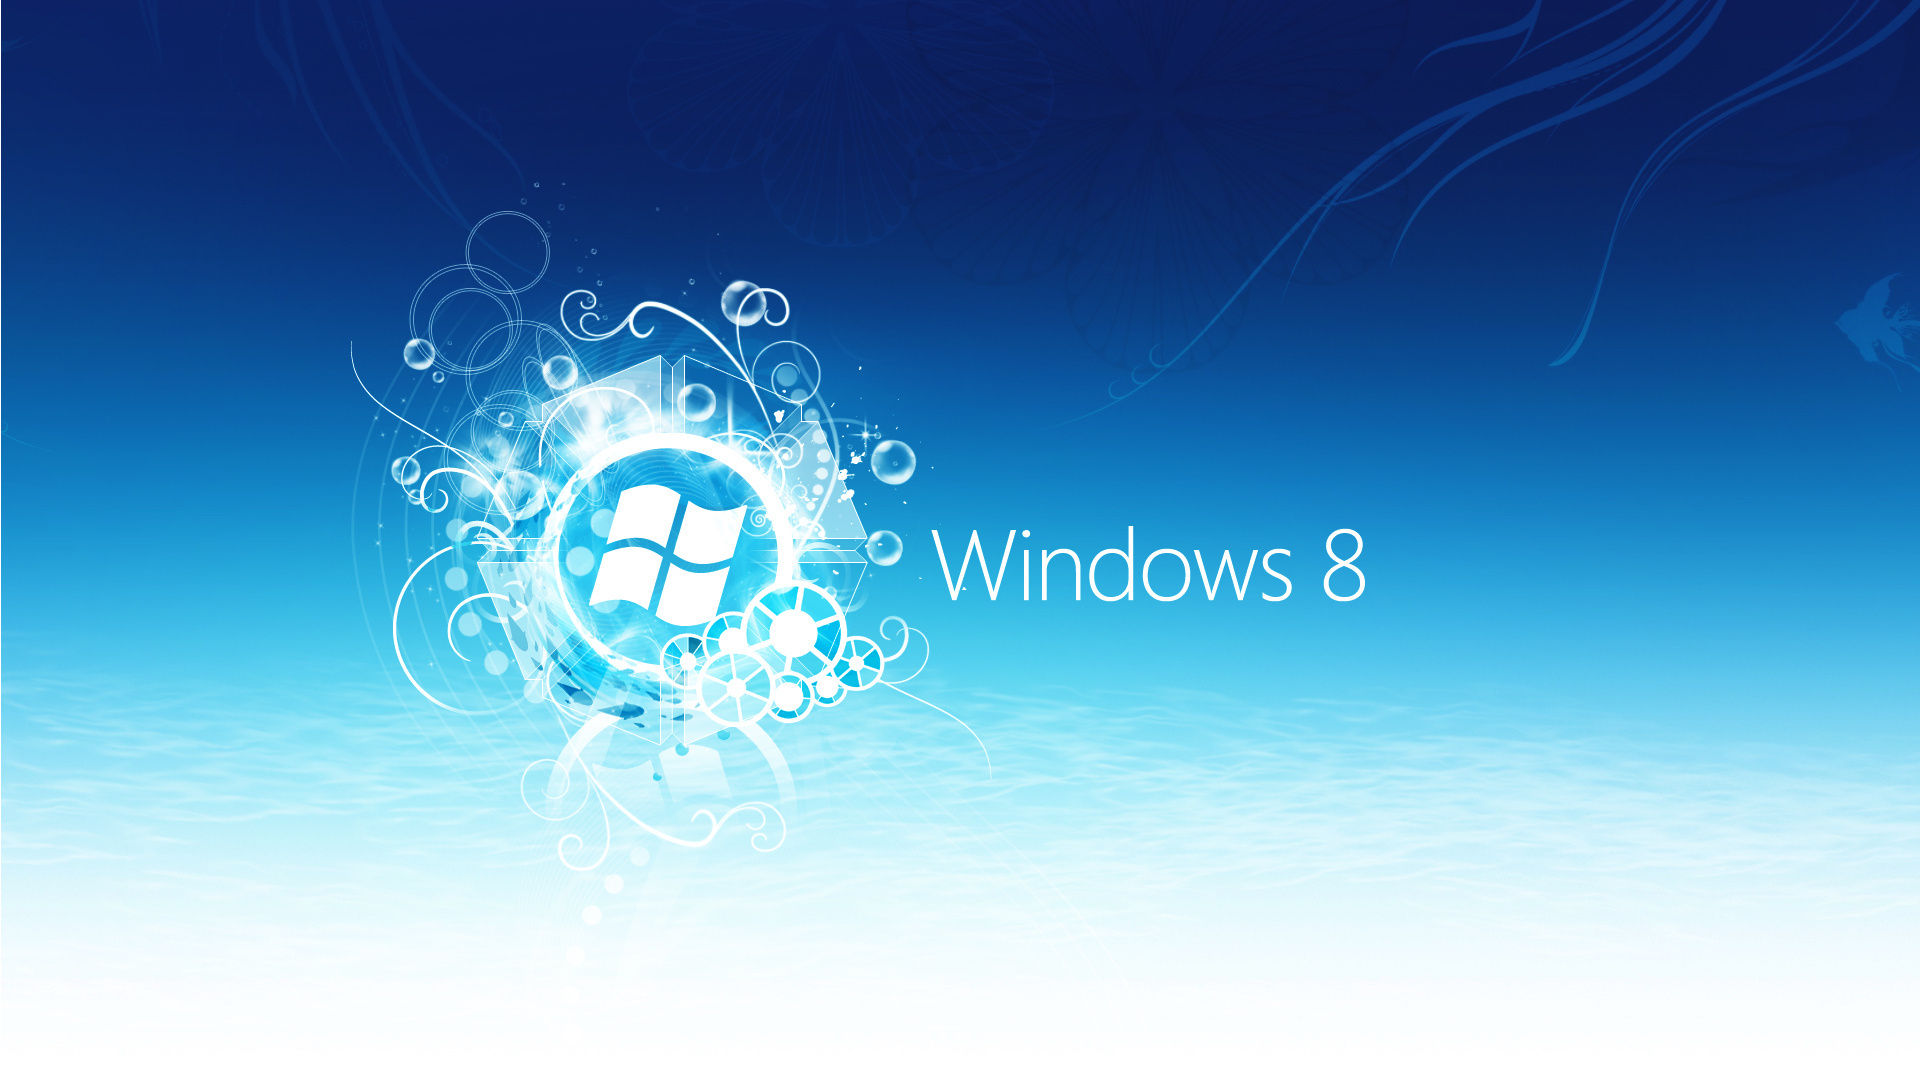 166 Windows 8 HD Wallpapers Backgrounds - Wallpaper Abyss -